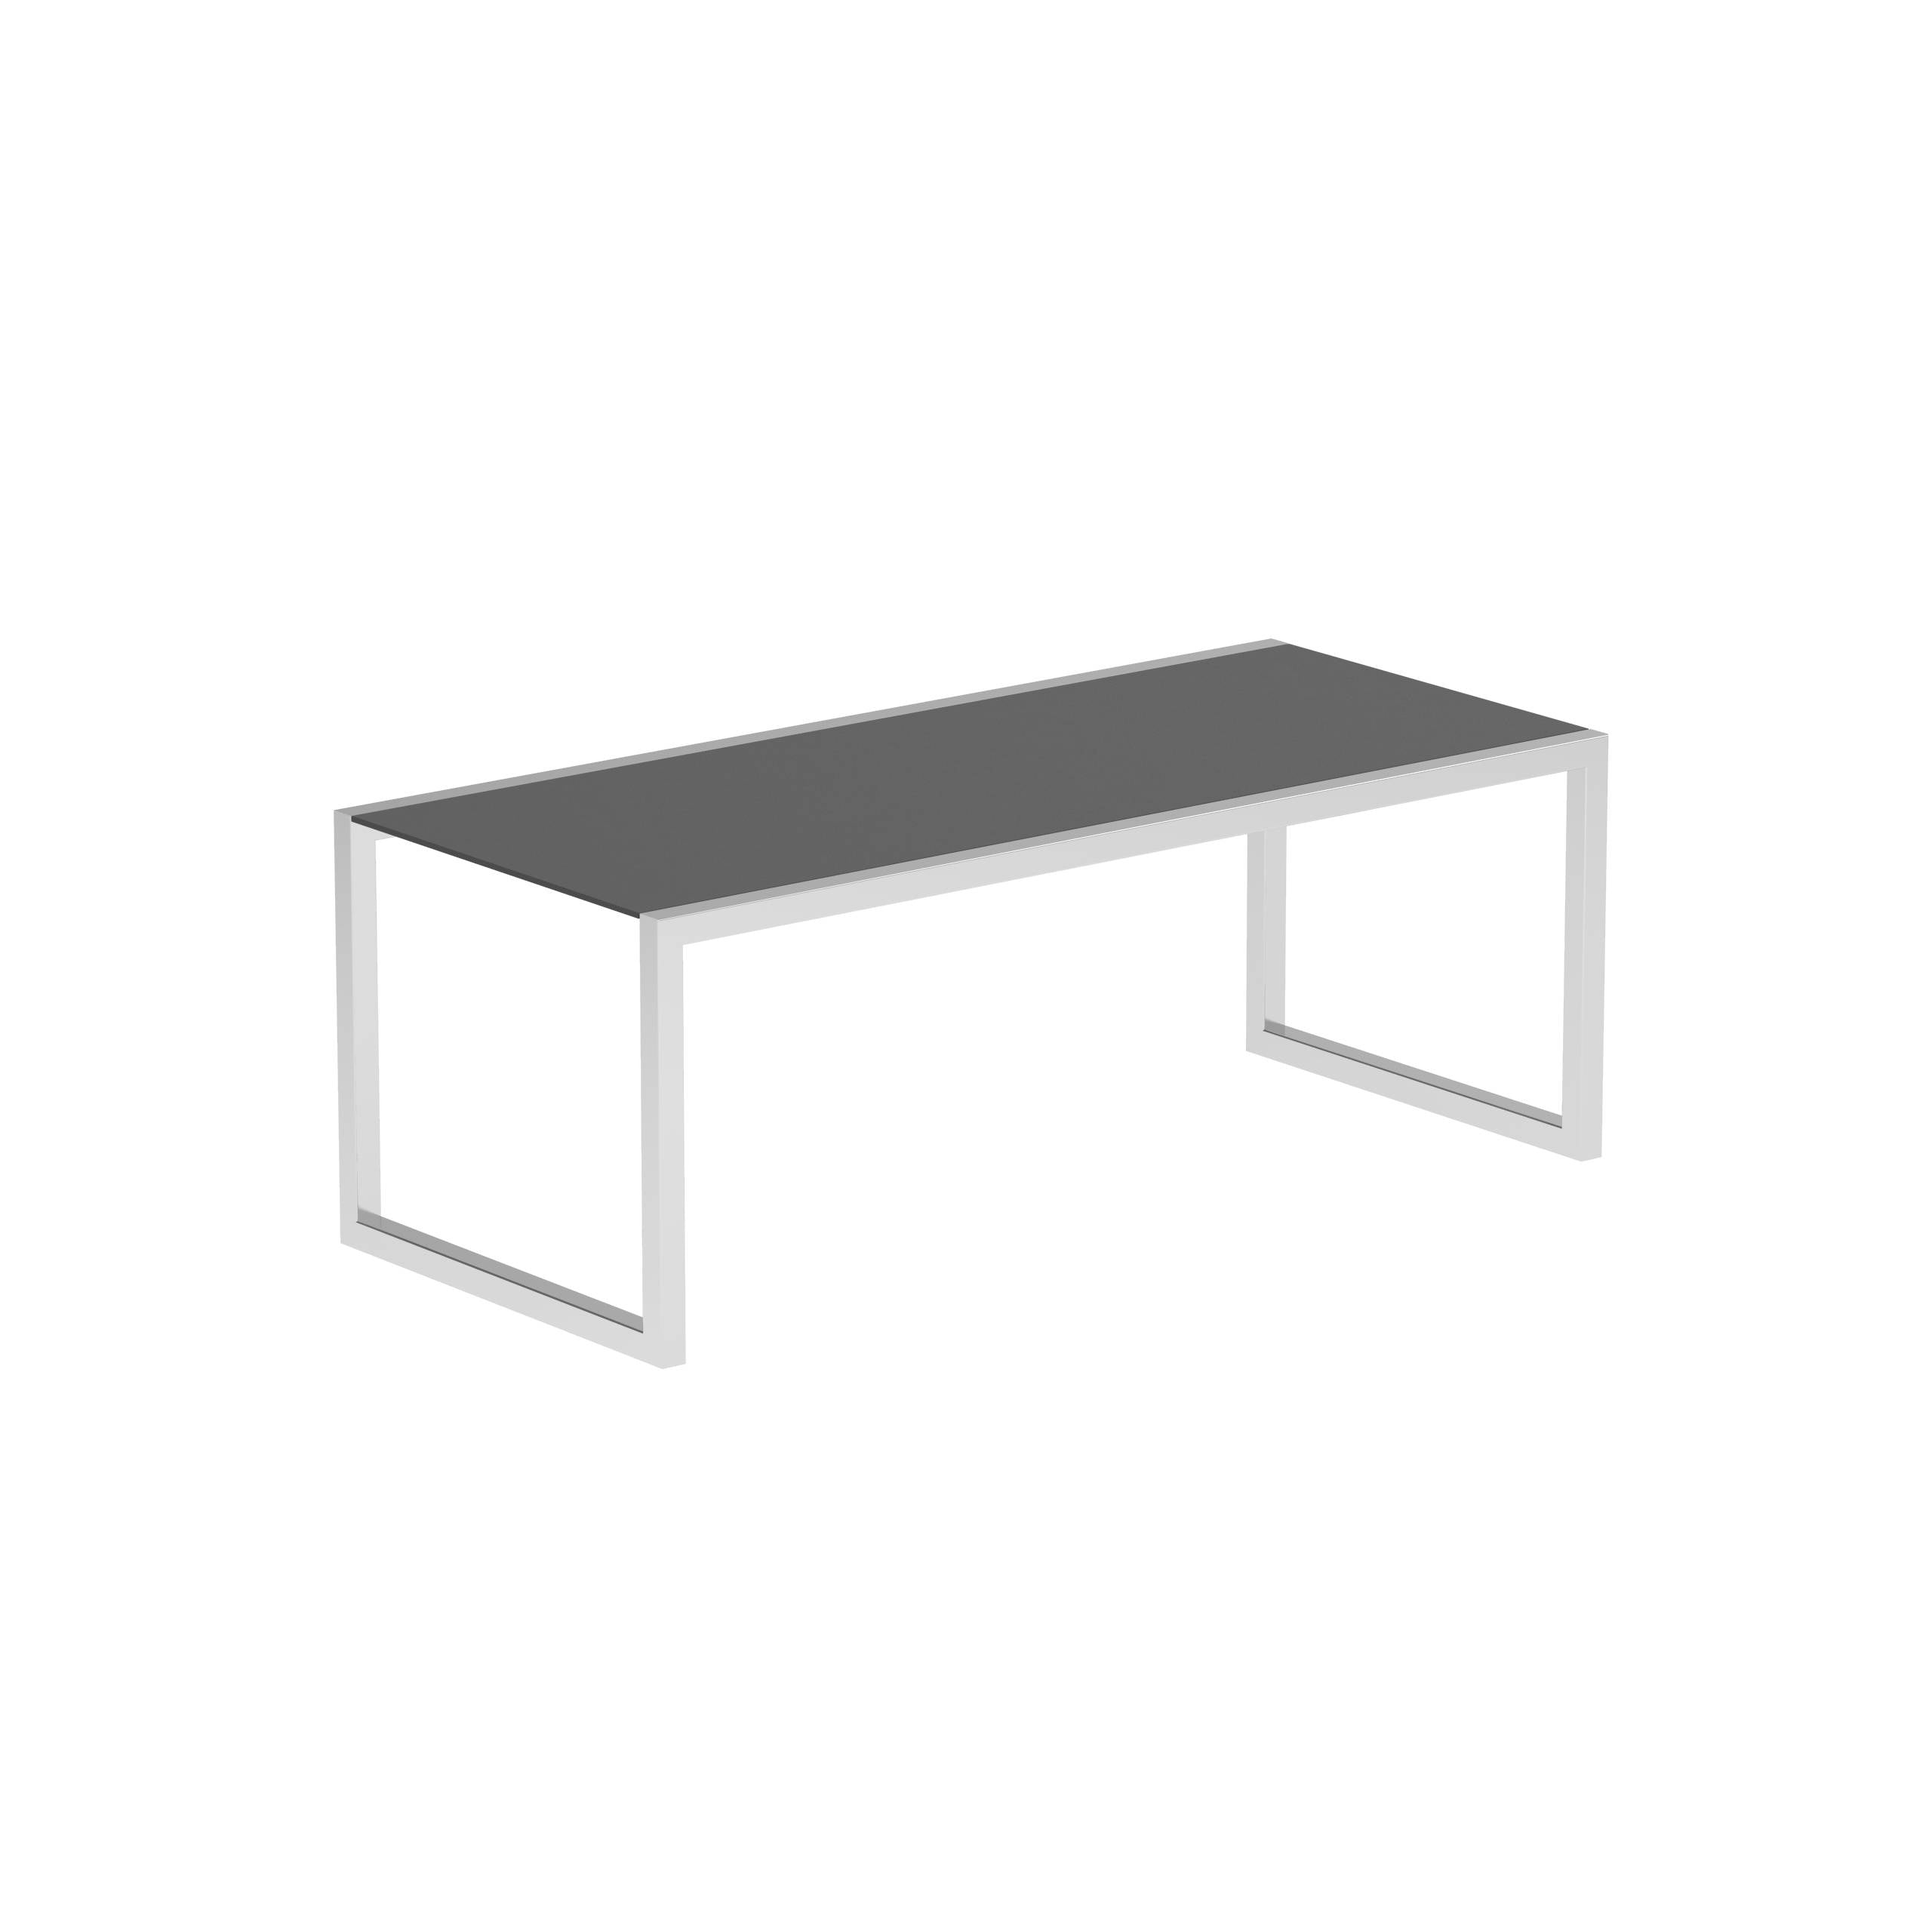 Ninix Table 200x90cm With Stainless Steel El.Pol And Ceramic Black